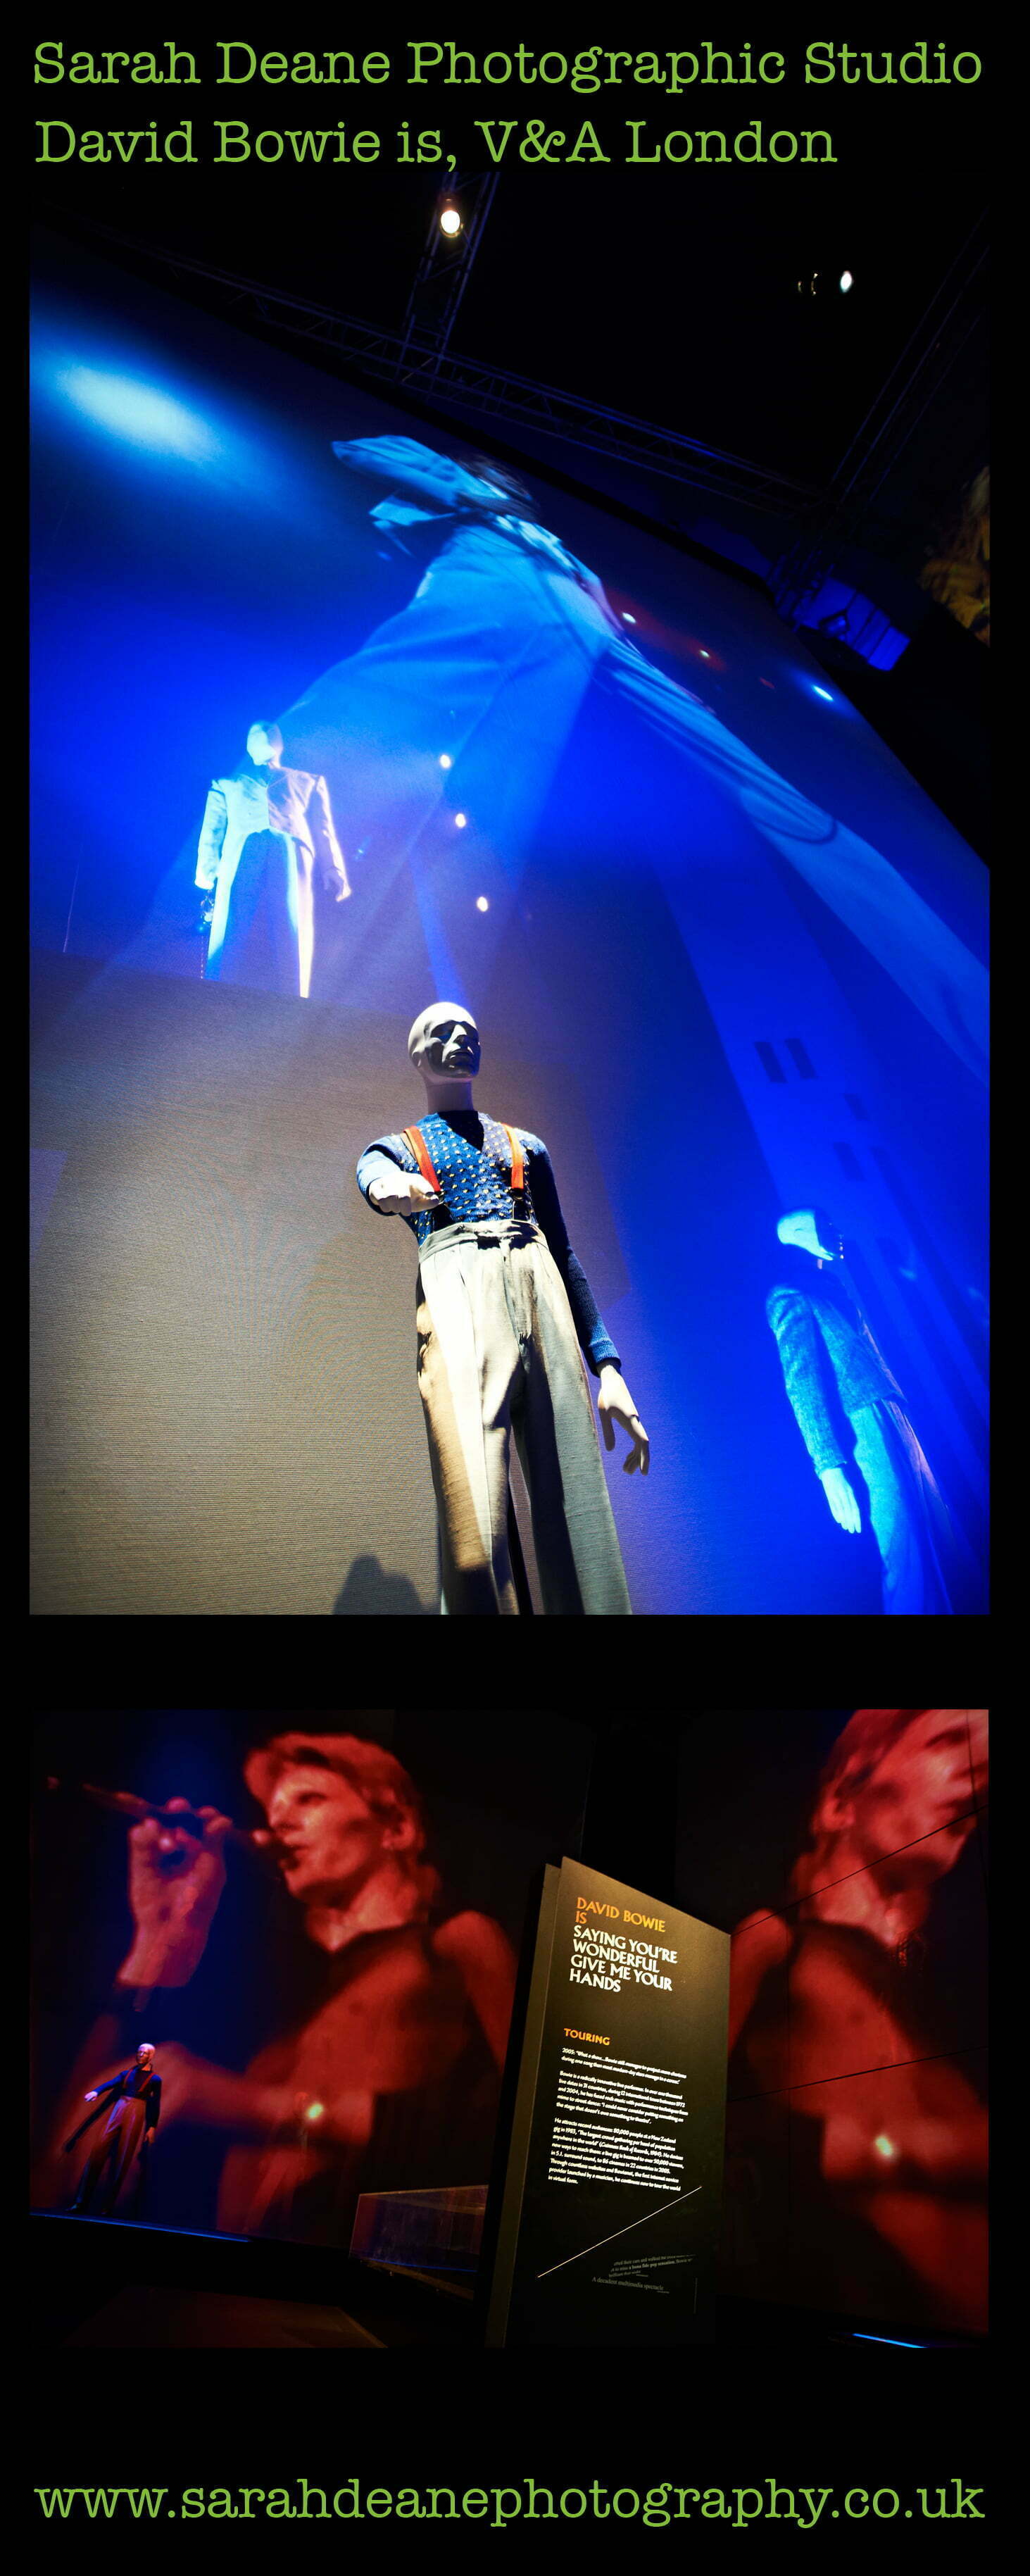 David Bowie is V&A London 4